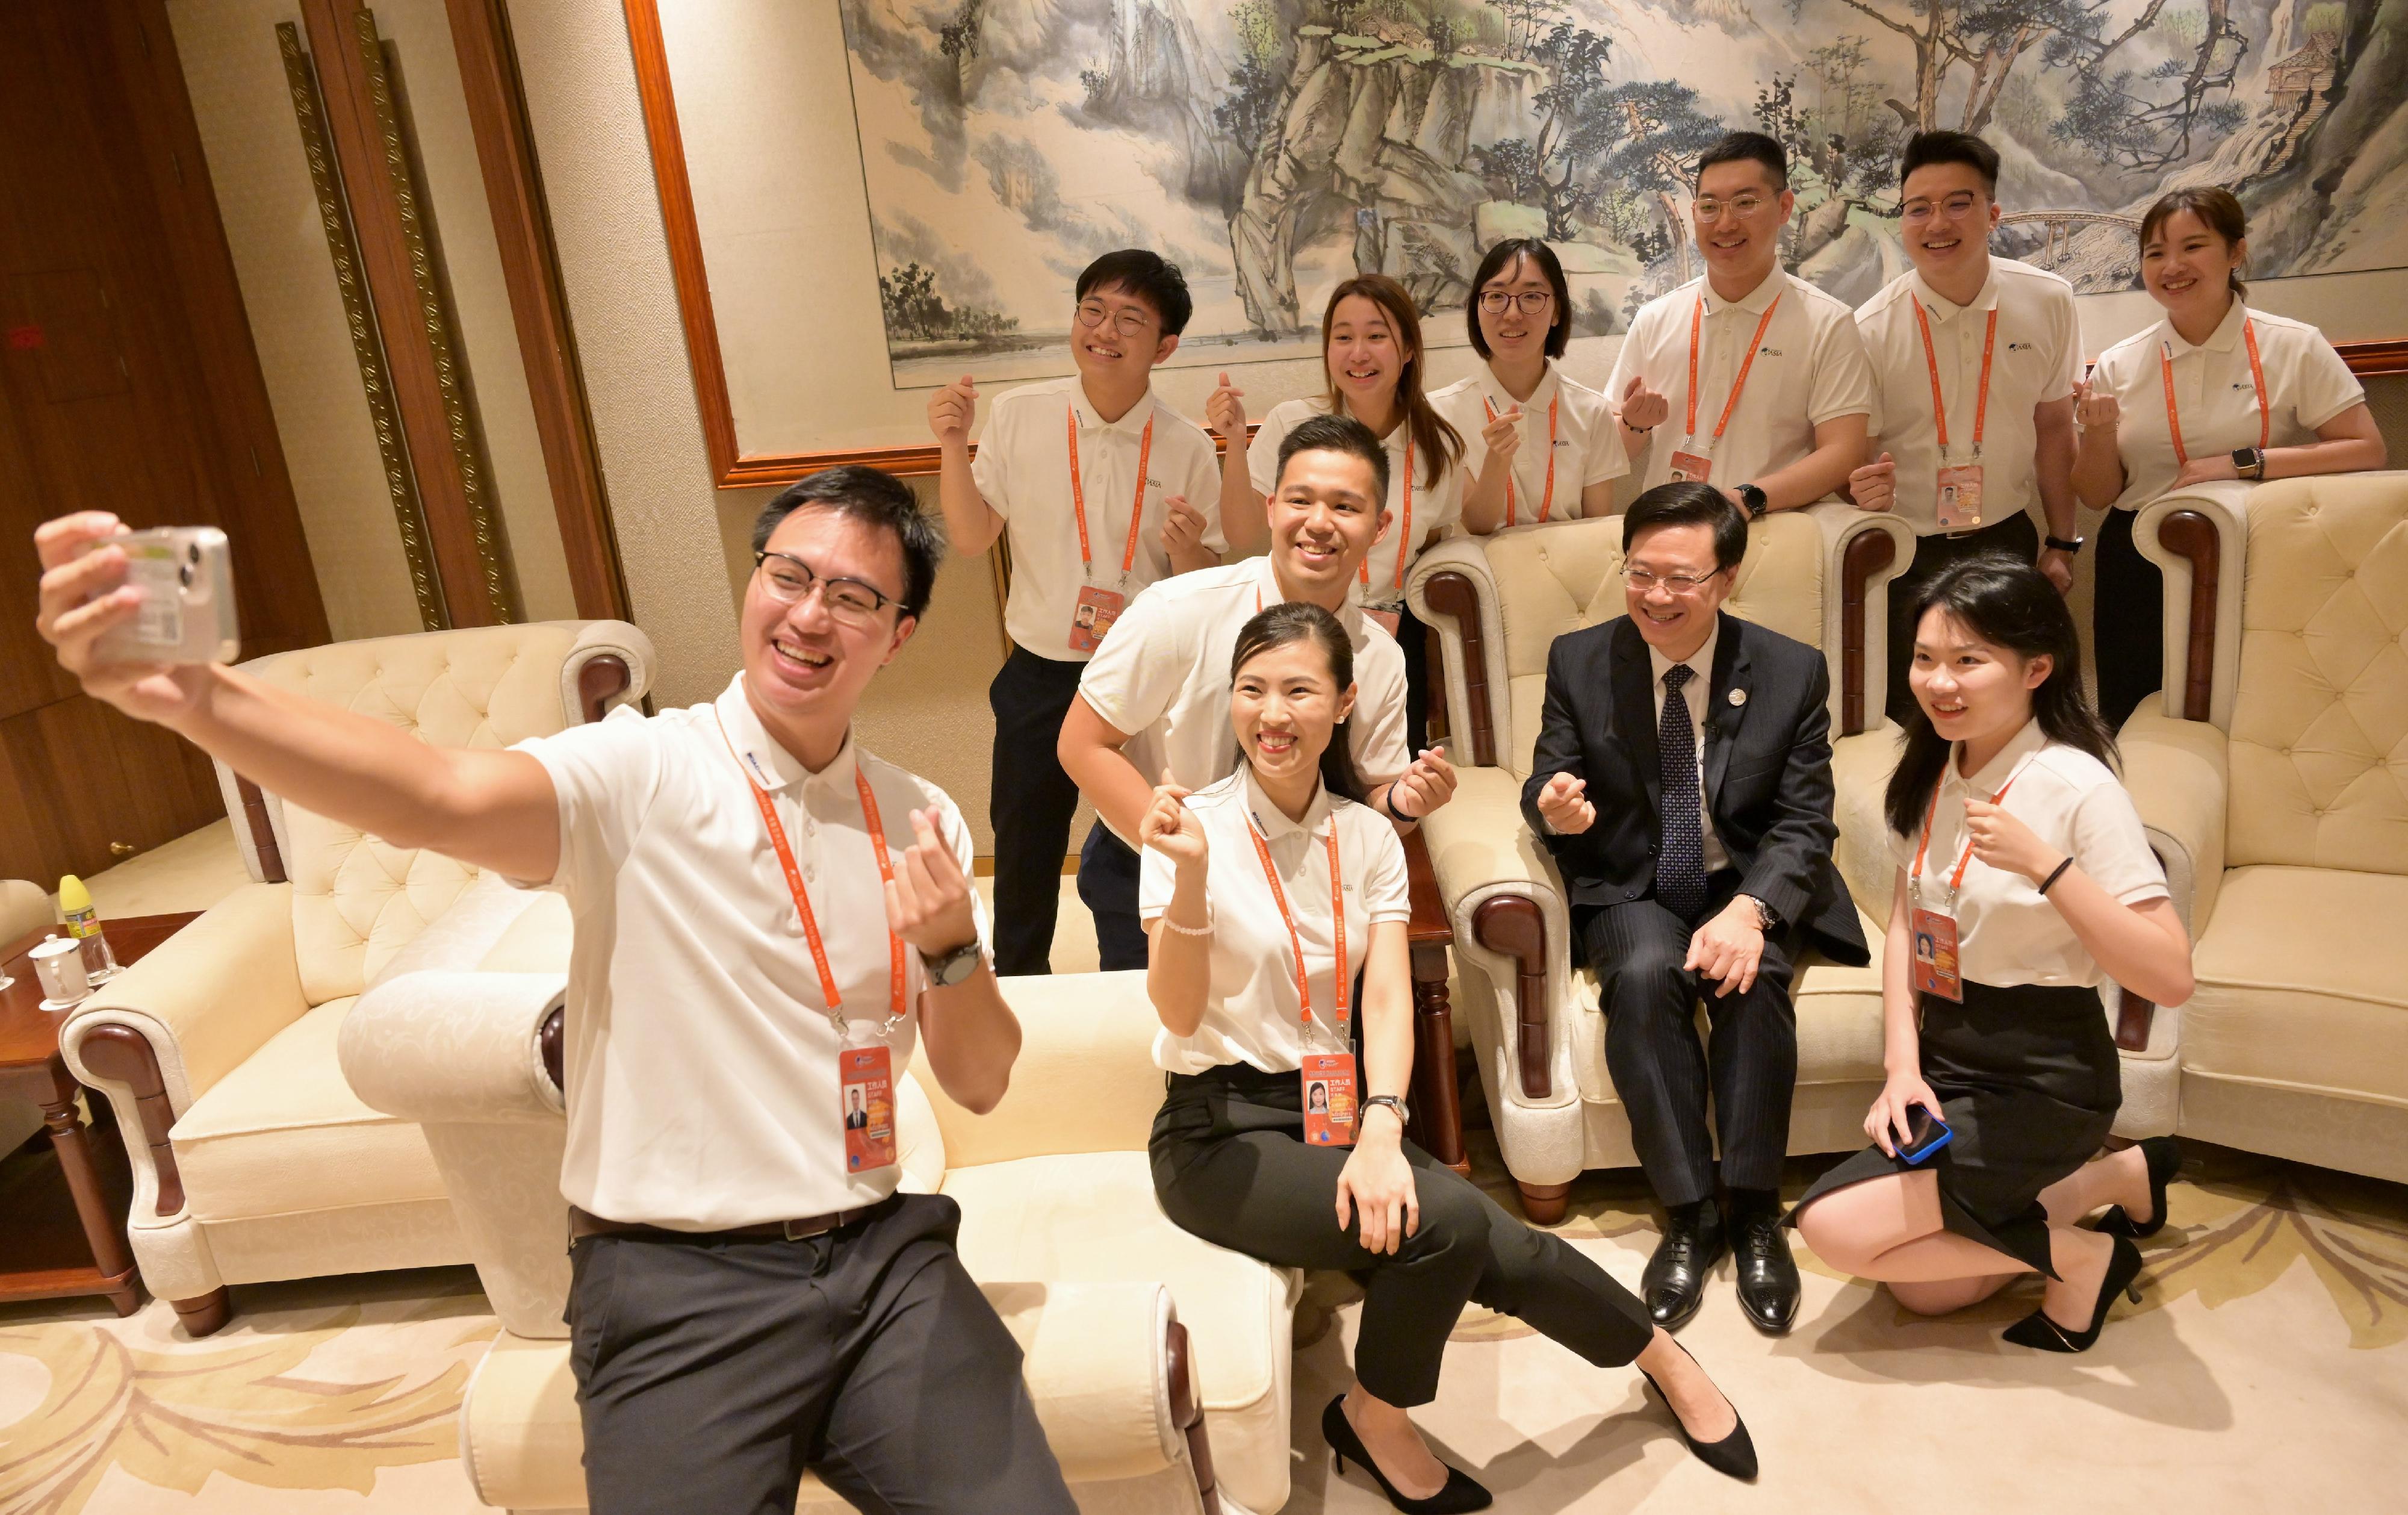 The Chief Executive, Mr John Lee, attended the certificate presentation ceremony for youth volunteers from Hong Kong and Macao at the Boao Forum for Asia Annual Conference 2023 in Hainan today (March 30). Photo shows Mr Lee (front row, second right) and the youth volunteers.